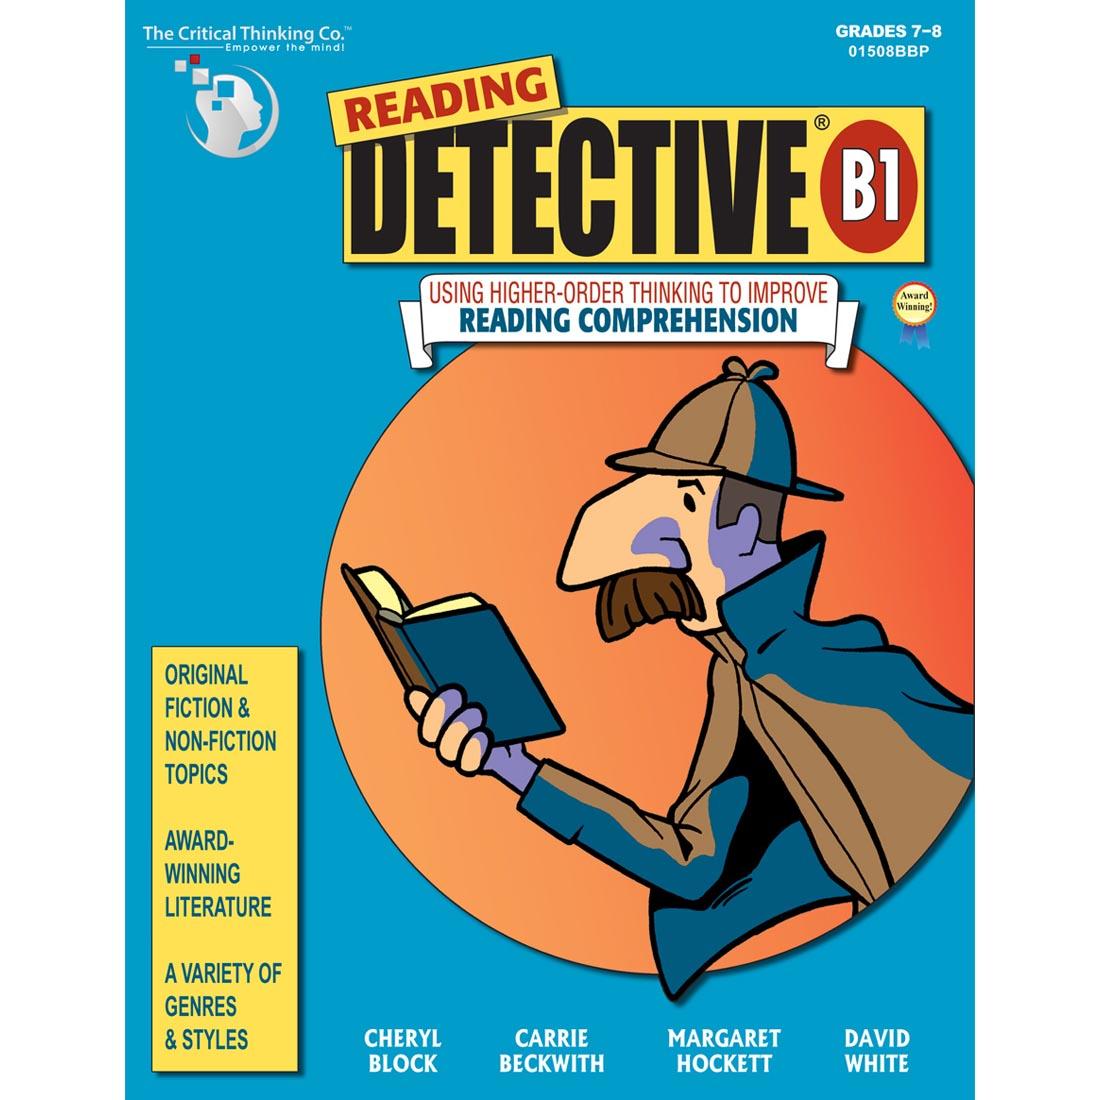 Reading Detective Book - Using Higher-Order Thinking To Improve Reading Comprehension